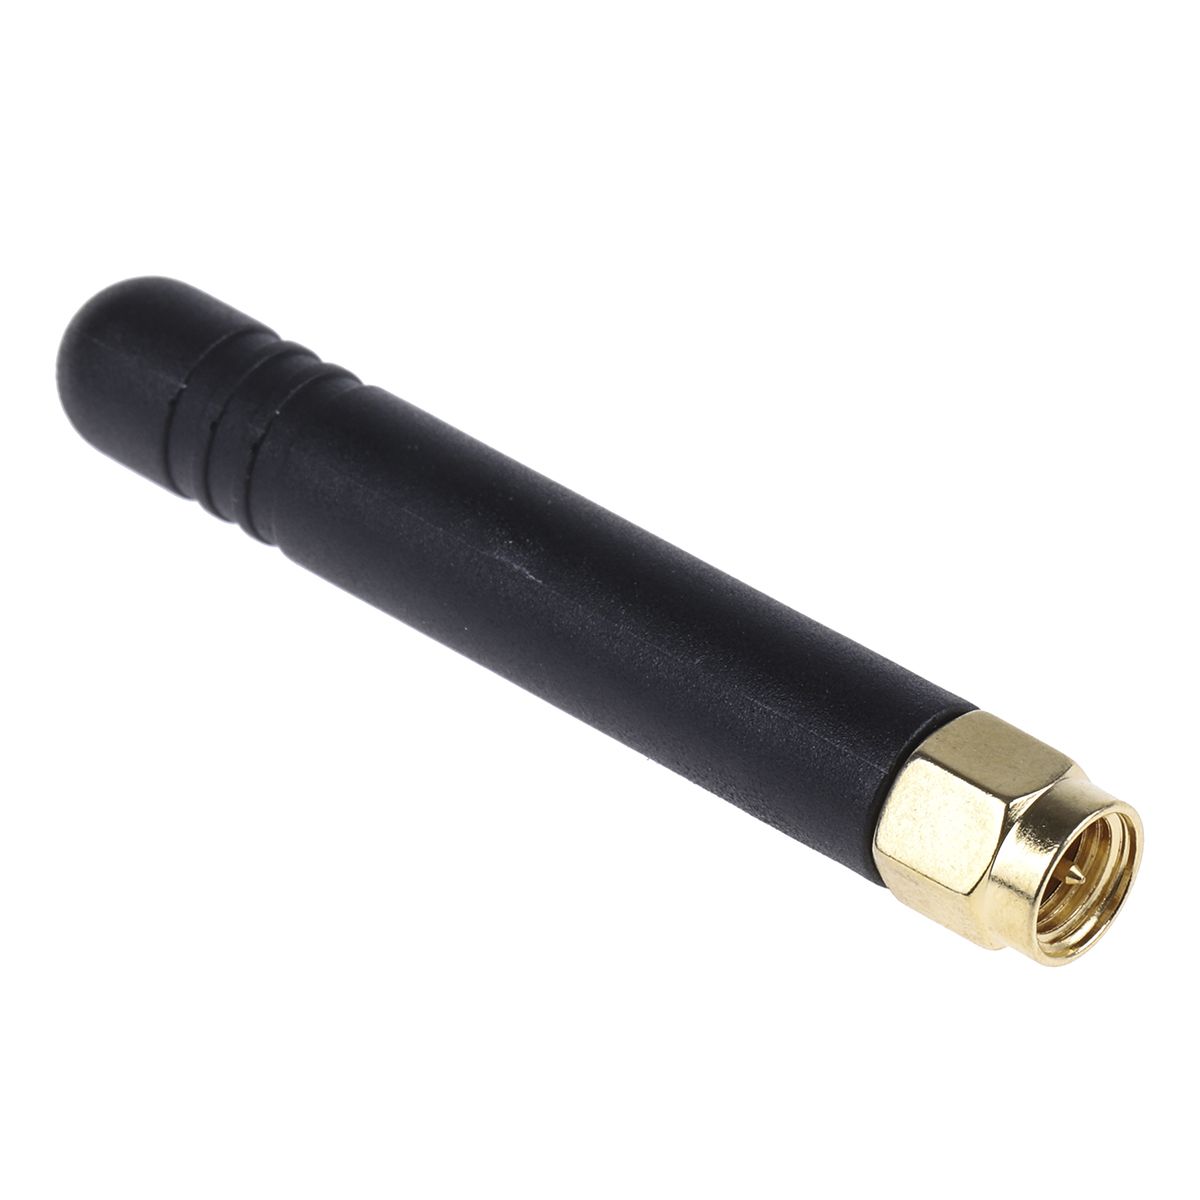 RF Solutions ANT-GHEL2-SMA Stubby Omnidirectional Antenna with SMA Connector, 2G (GSM/GPRS)